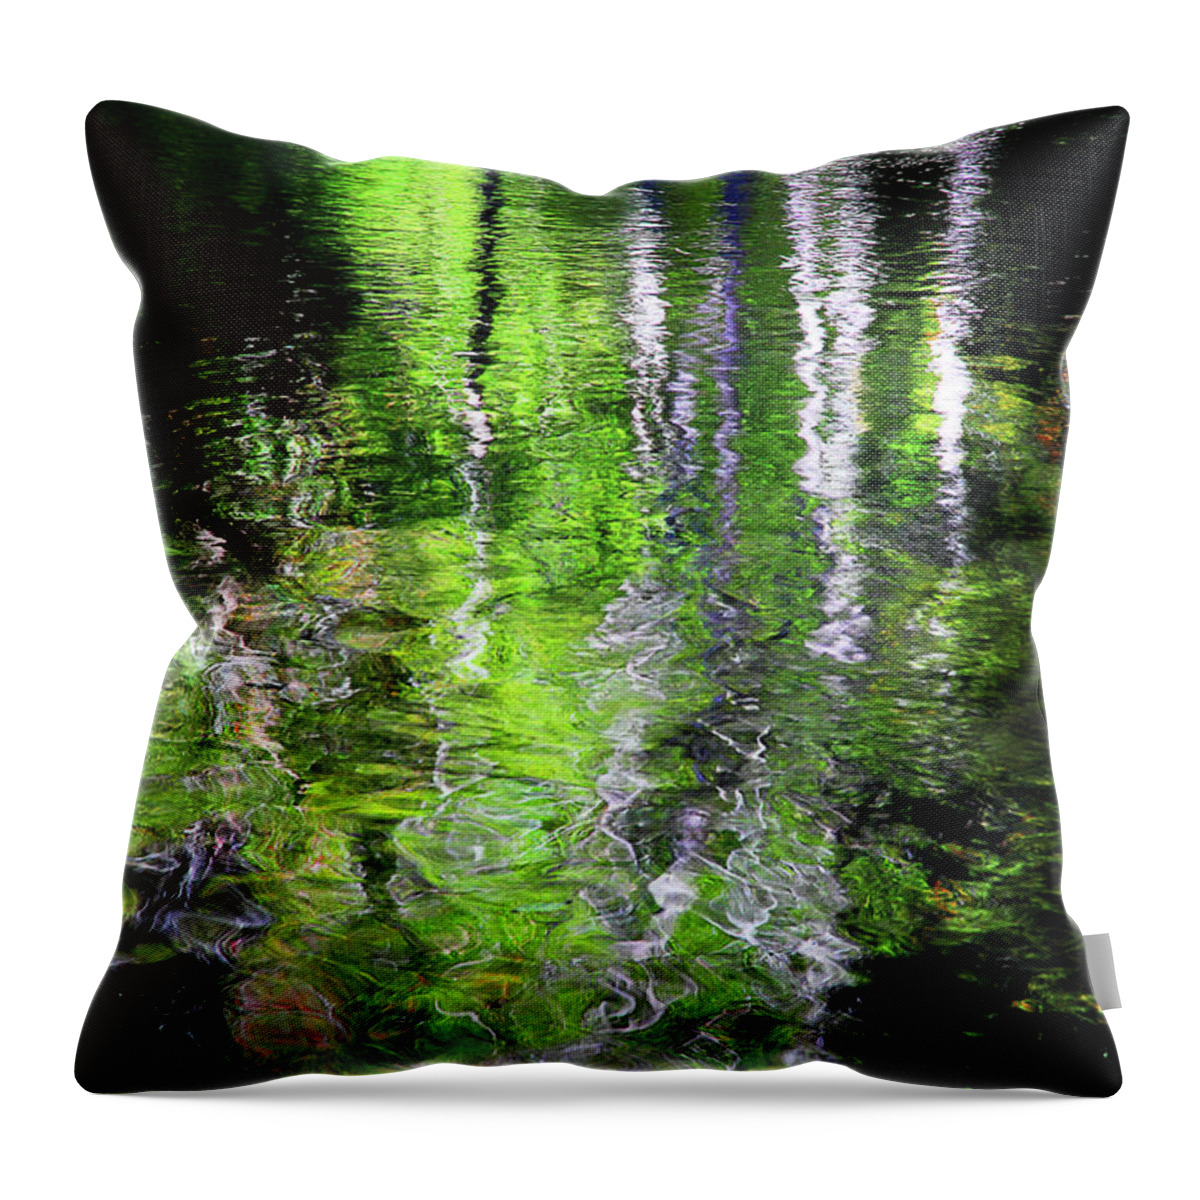 Abstract Throw Pillow featuring the photograph Abstract Along The Stream by Mike Eingle